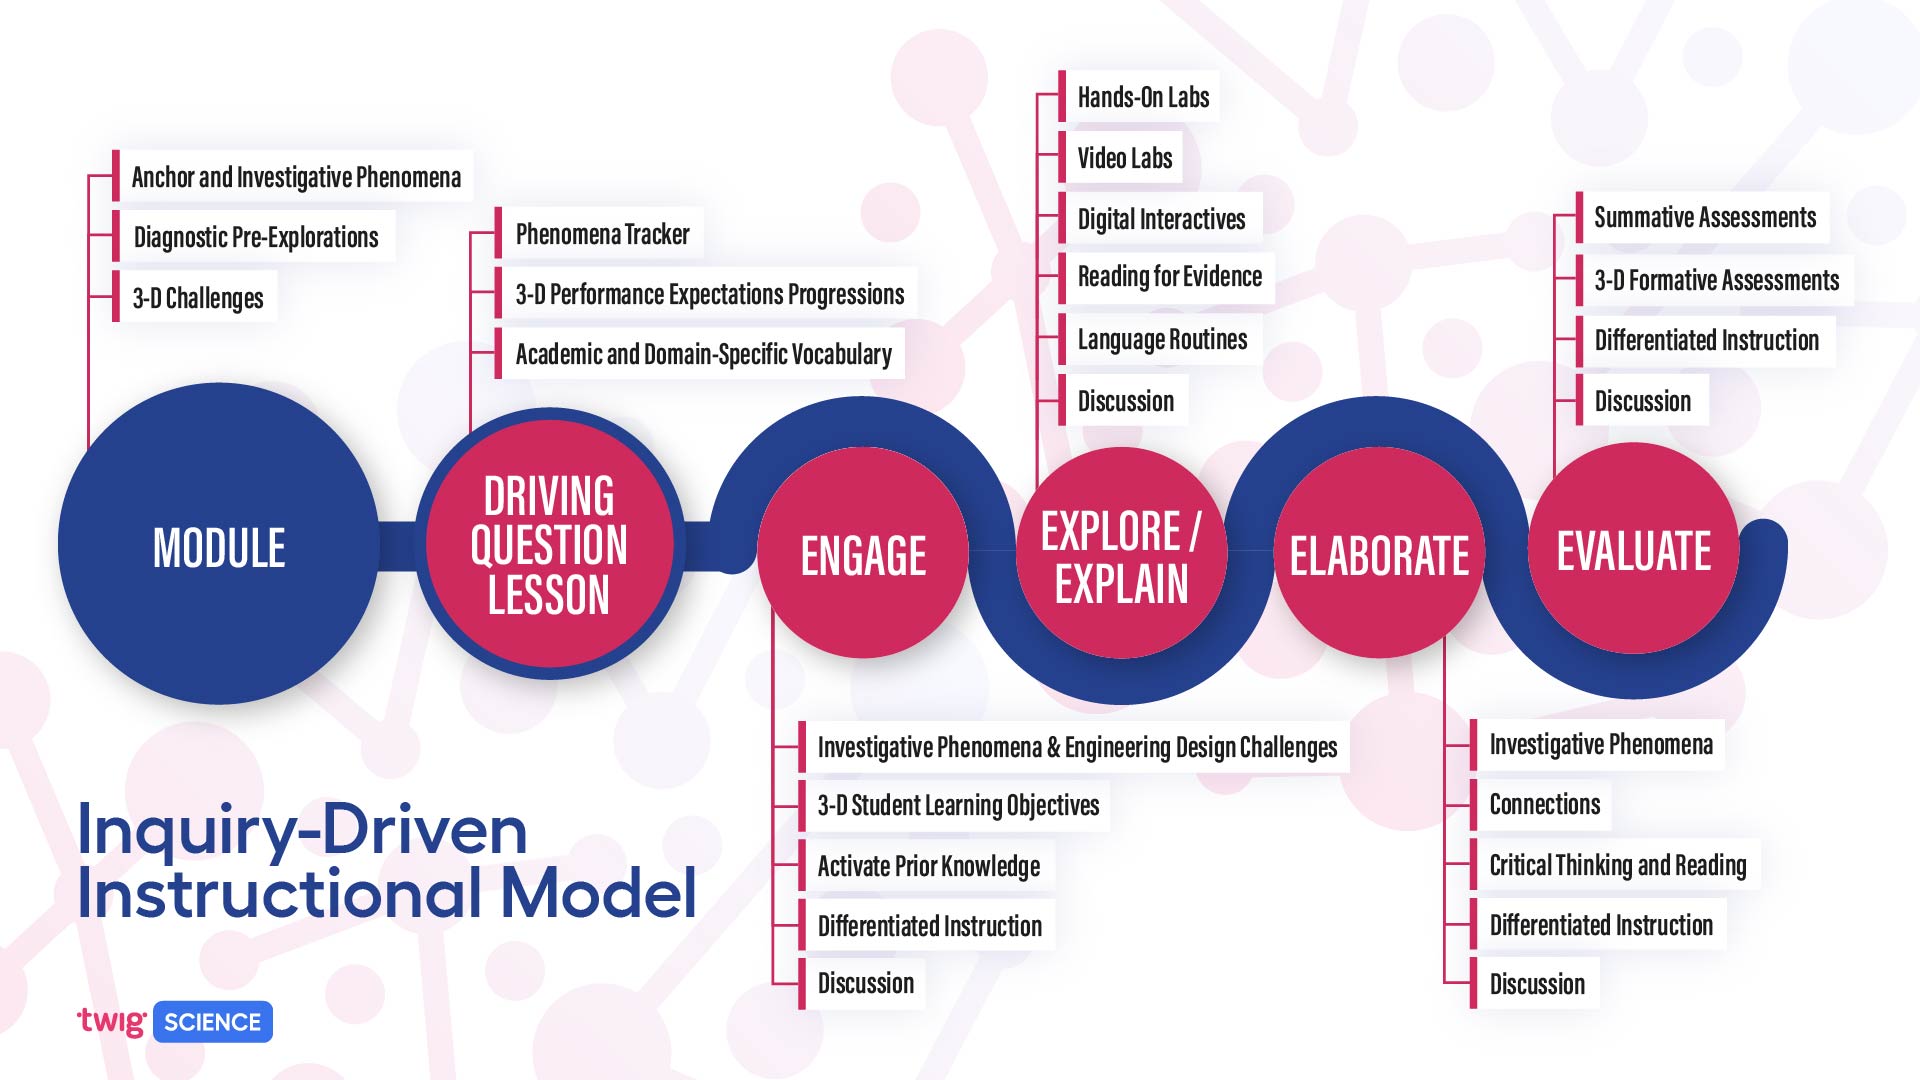 A visual representation showing the Inquiry-Driven Instructional Model for Twig Science